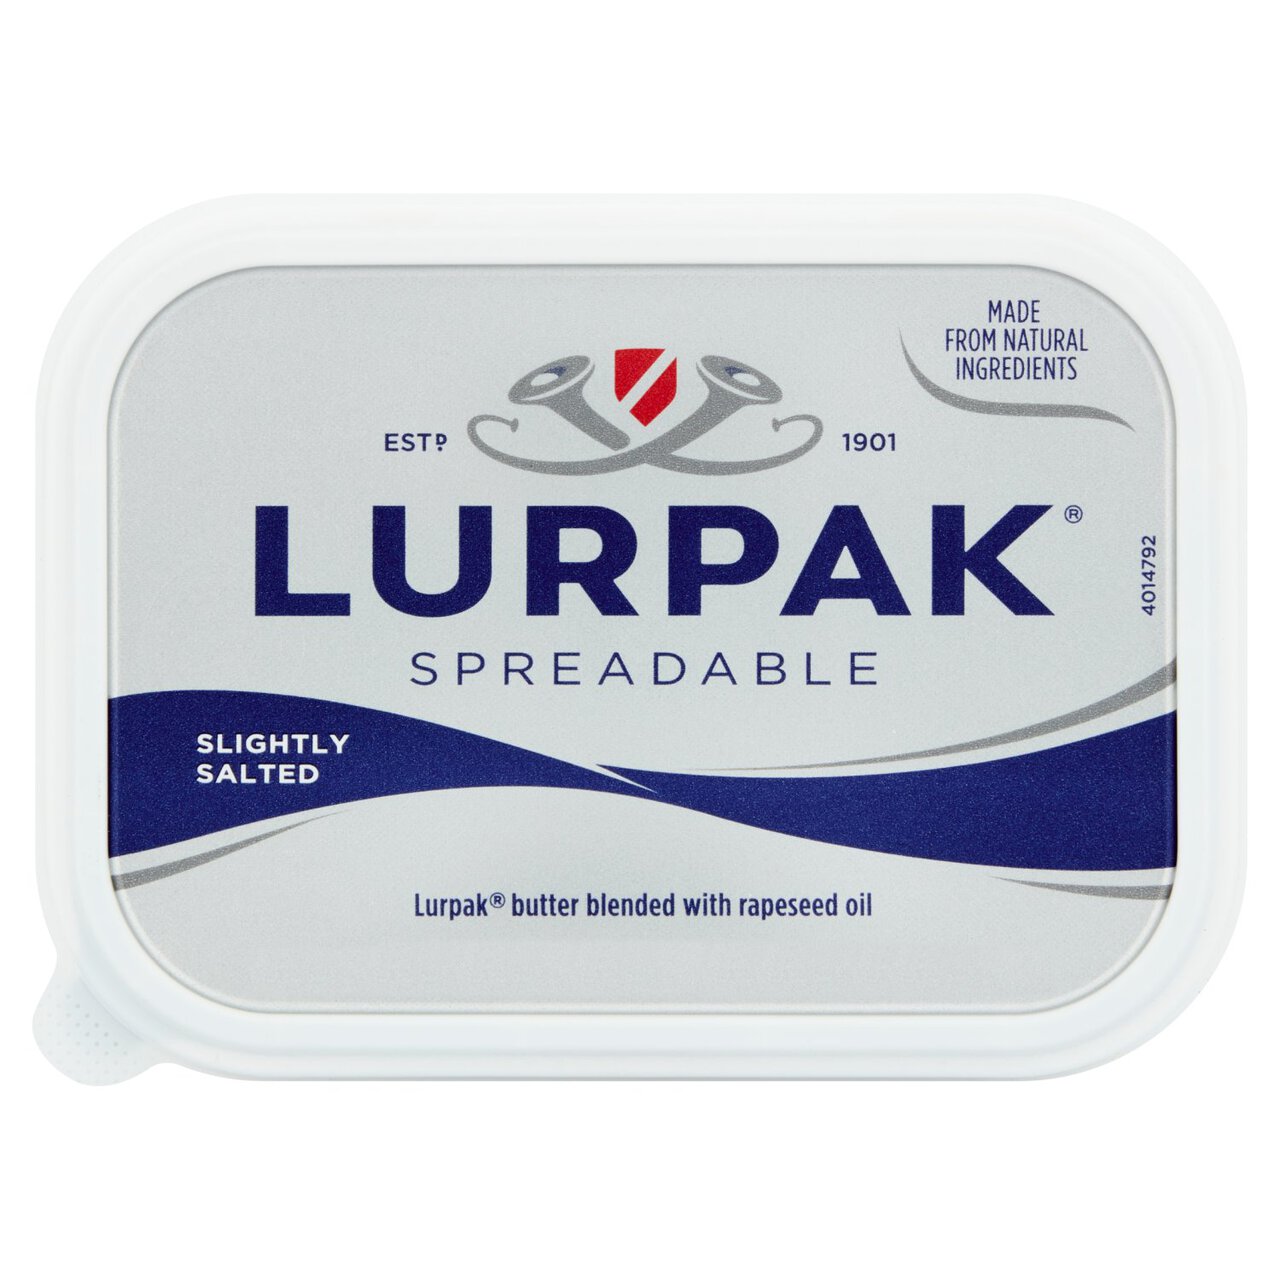 Lurpak Slightly Salted Spreadable Blend of Butter and Rapeseed Oil 500g